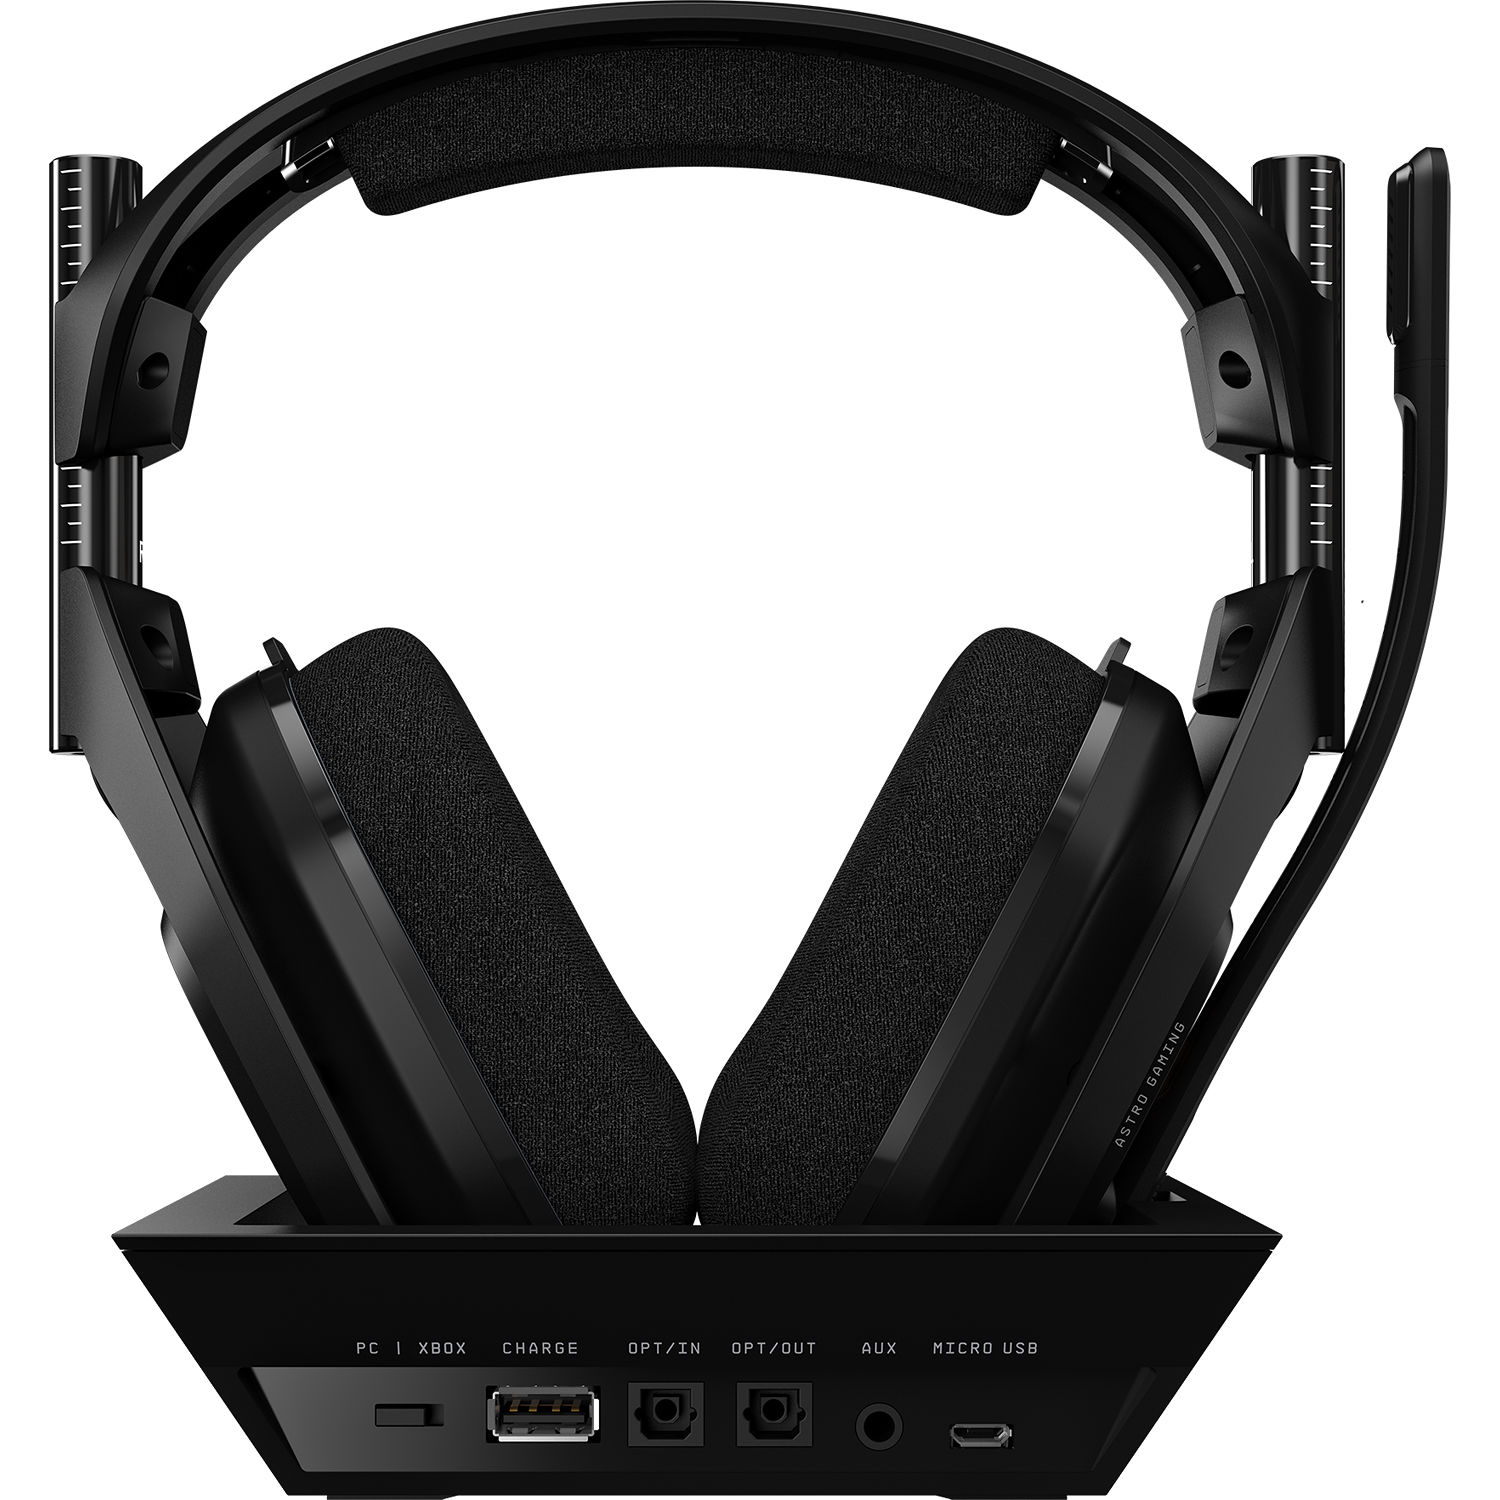 astros gaming headset xbox one